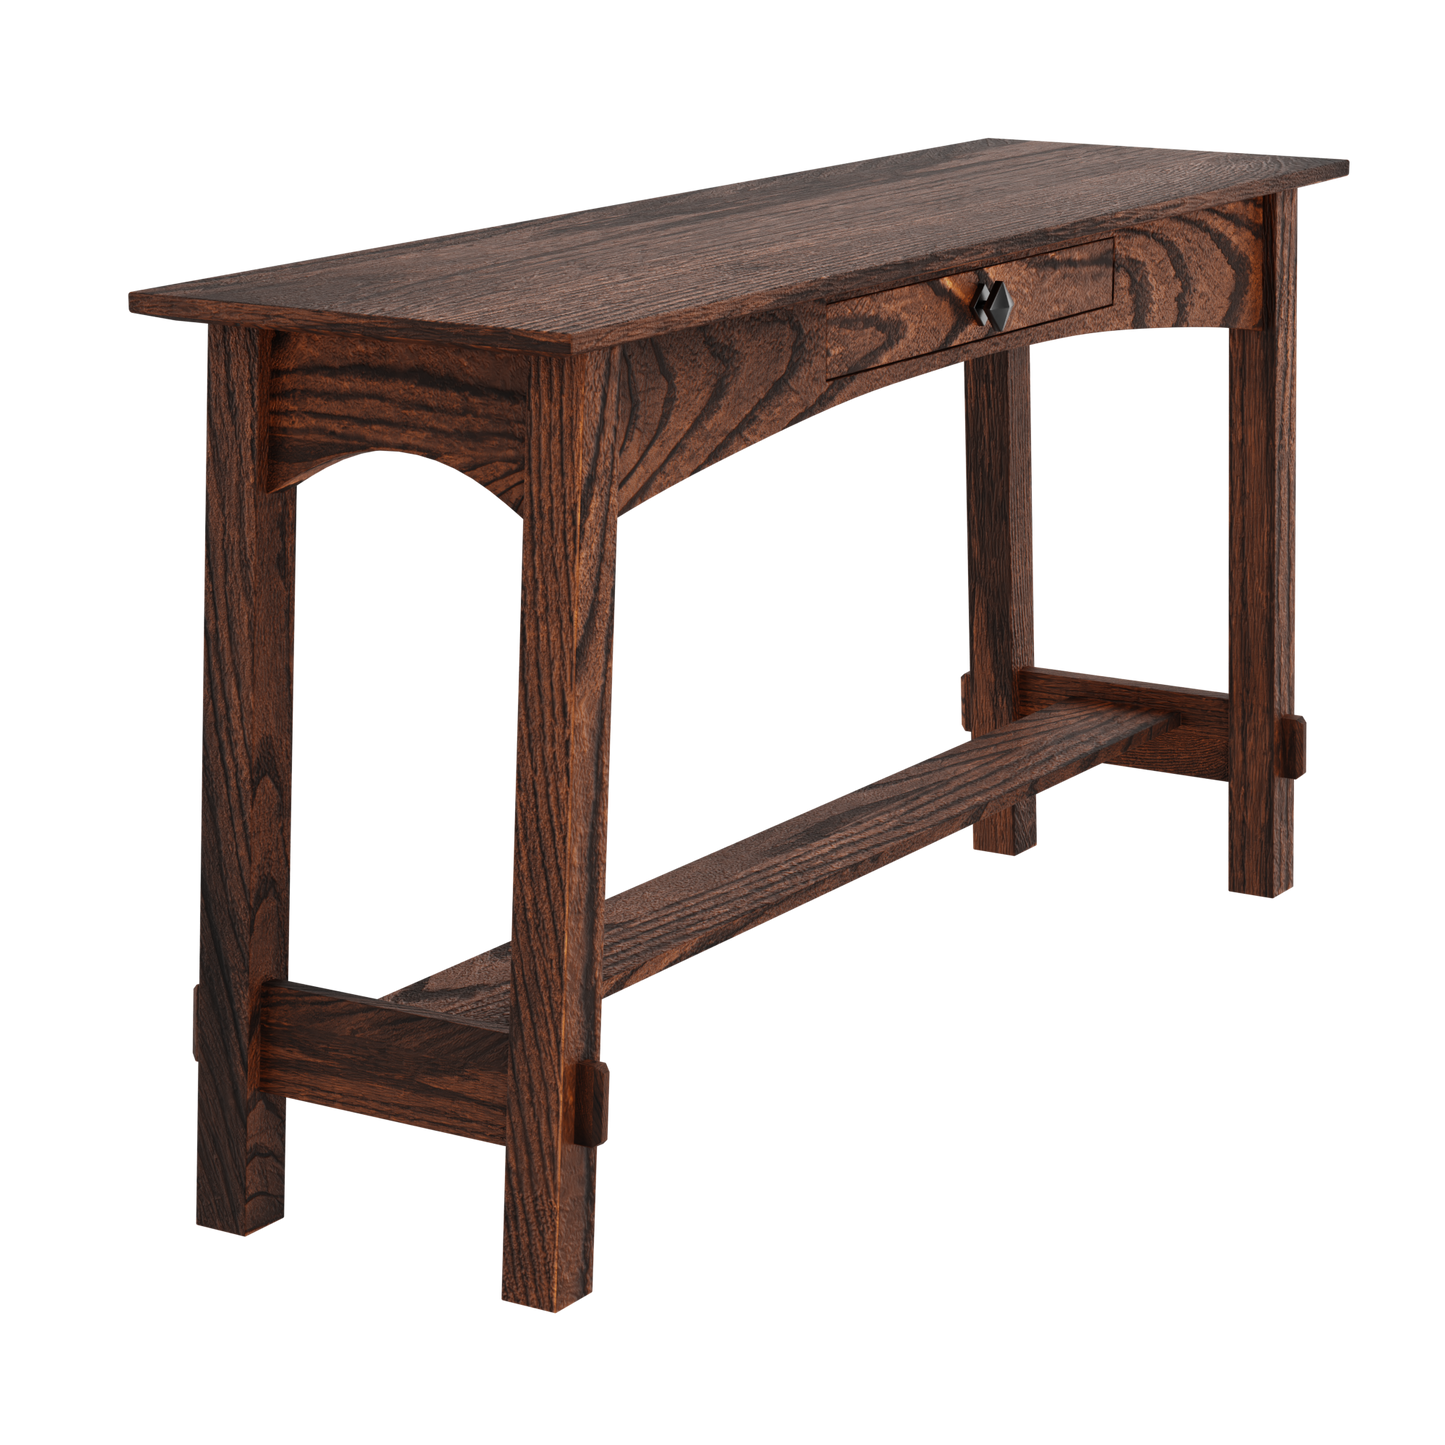 McCoy Craftsman Sofa Table with Drawer